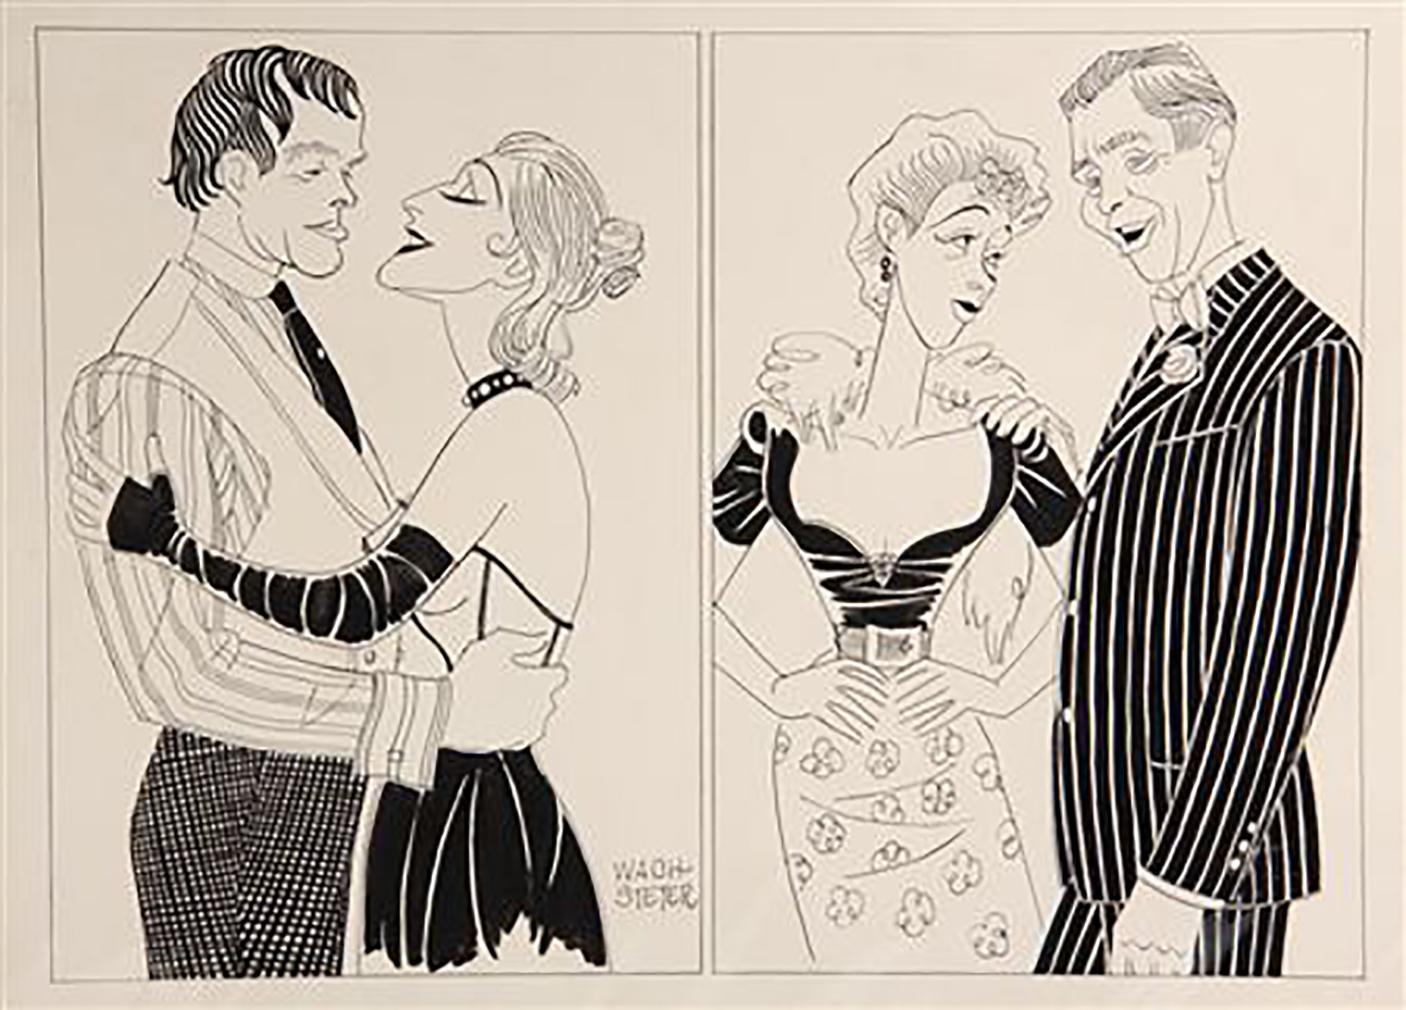 George Wachsteter Figurative Art - Double Set of Caricatures for "Three Penny Opera" and "The Iceman Cometh"